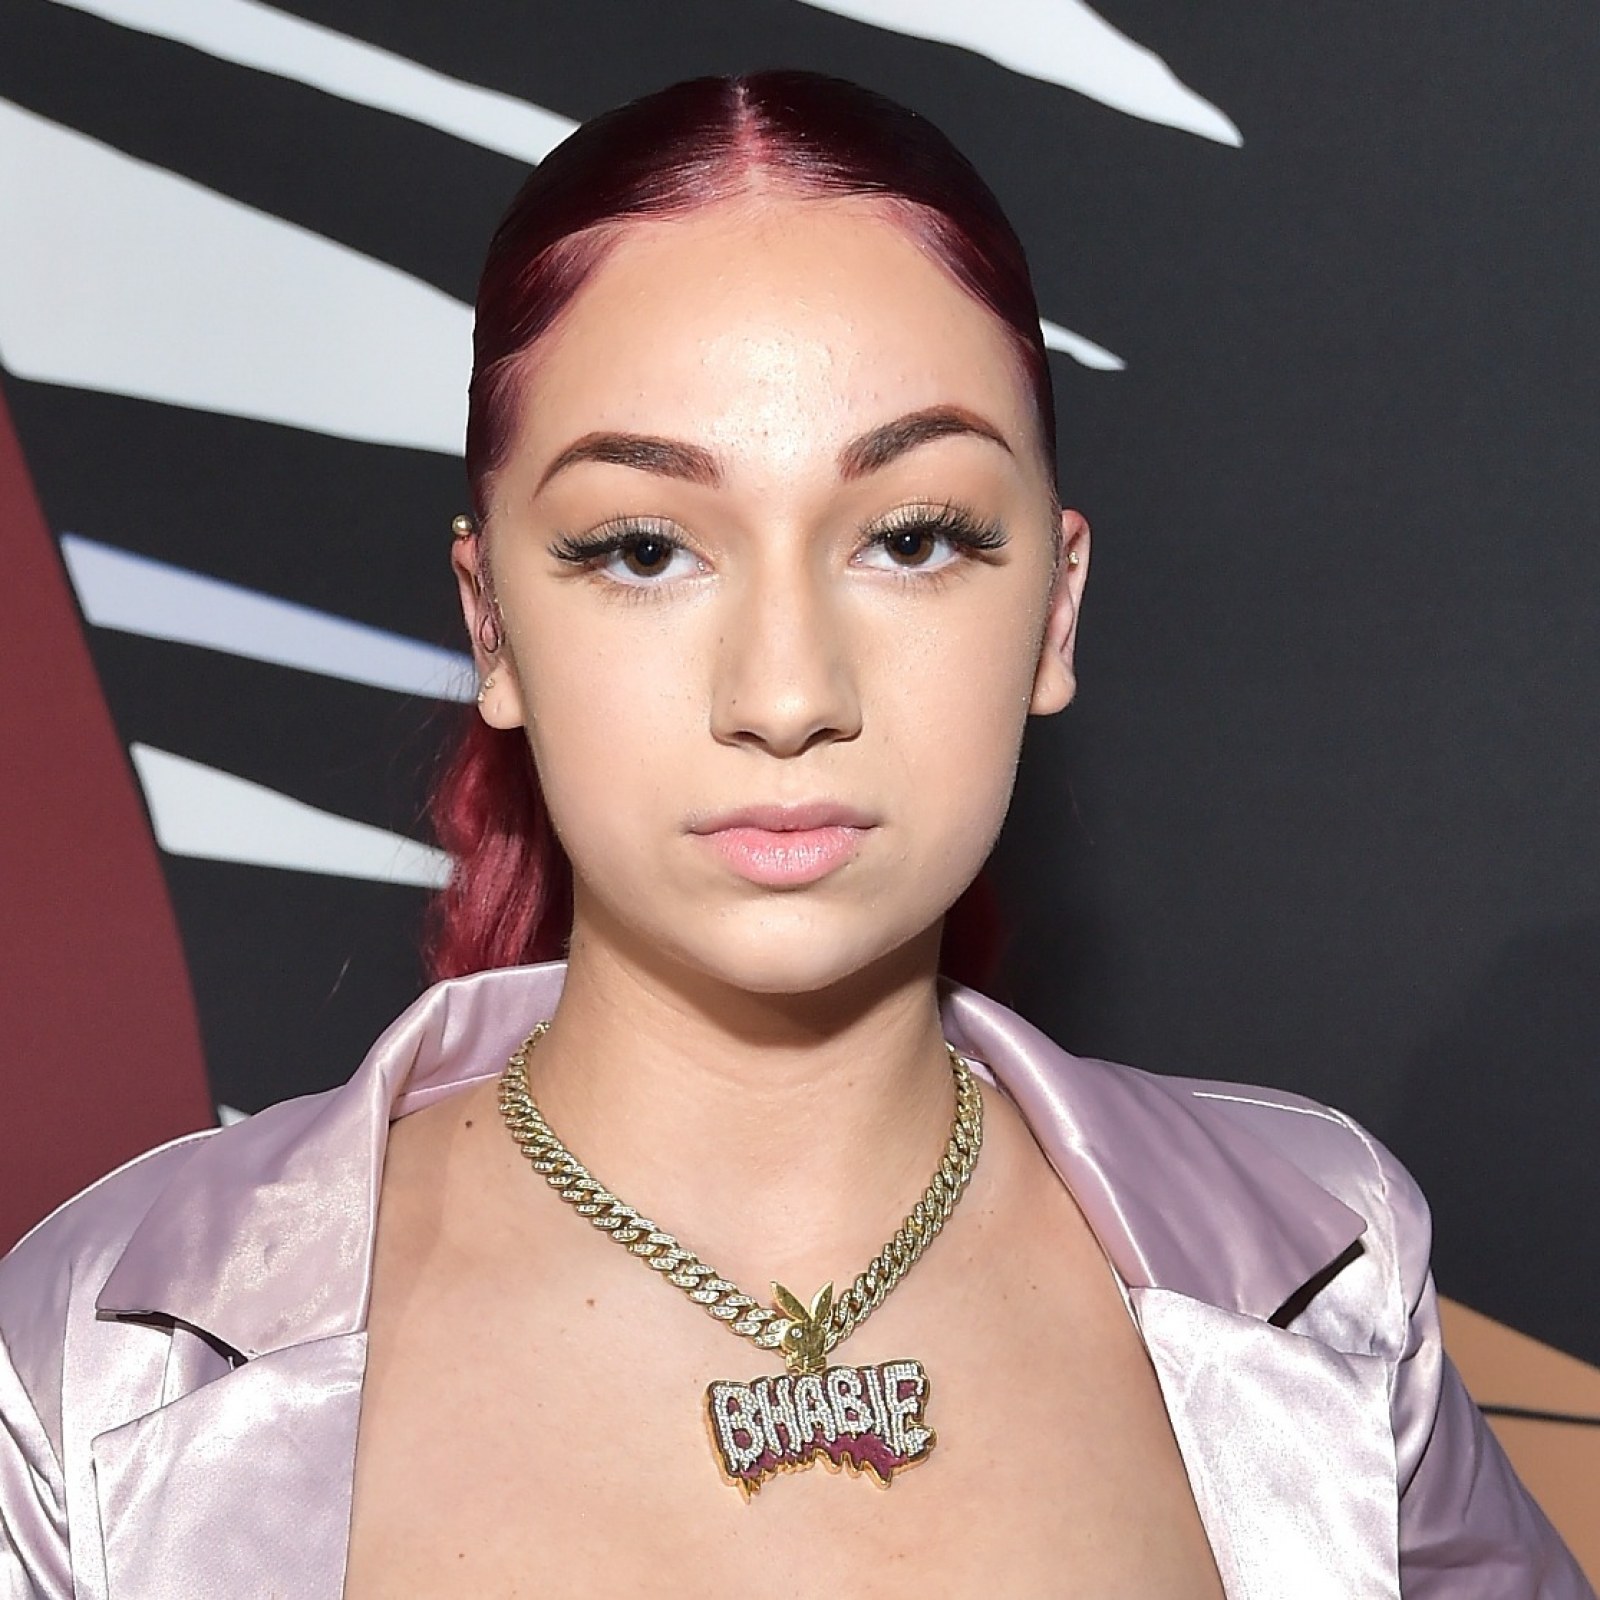 FULL VIDEO: Bhad Bhabie Nude Danielle Bregoli Onlyfans! *RATED*